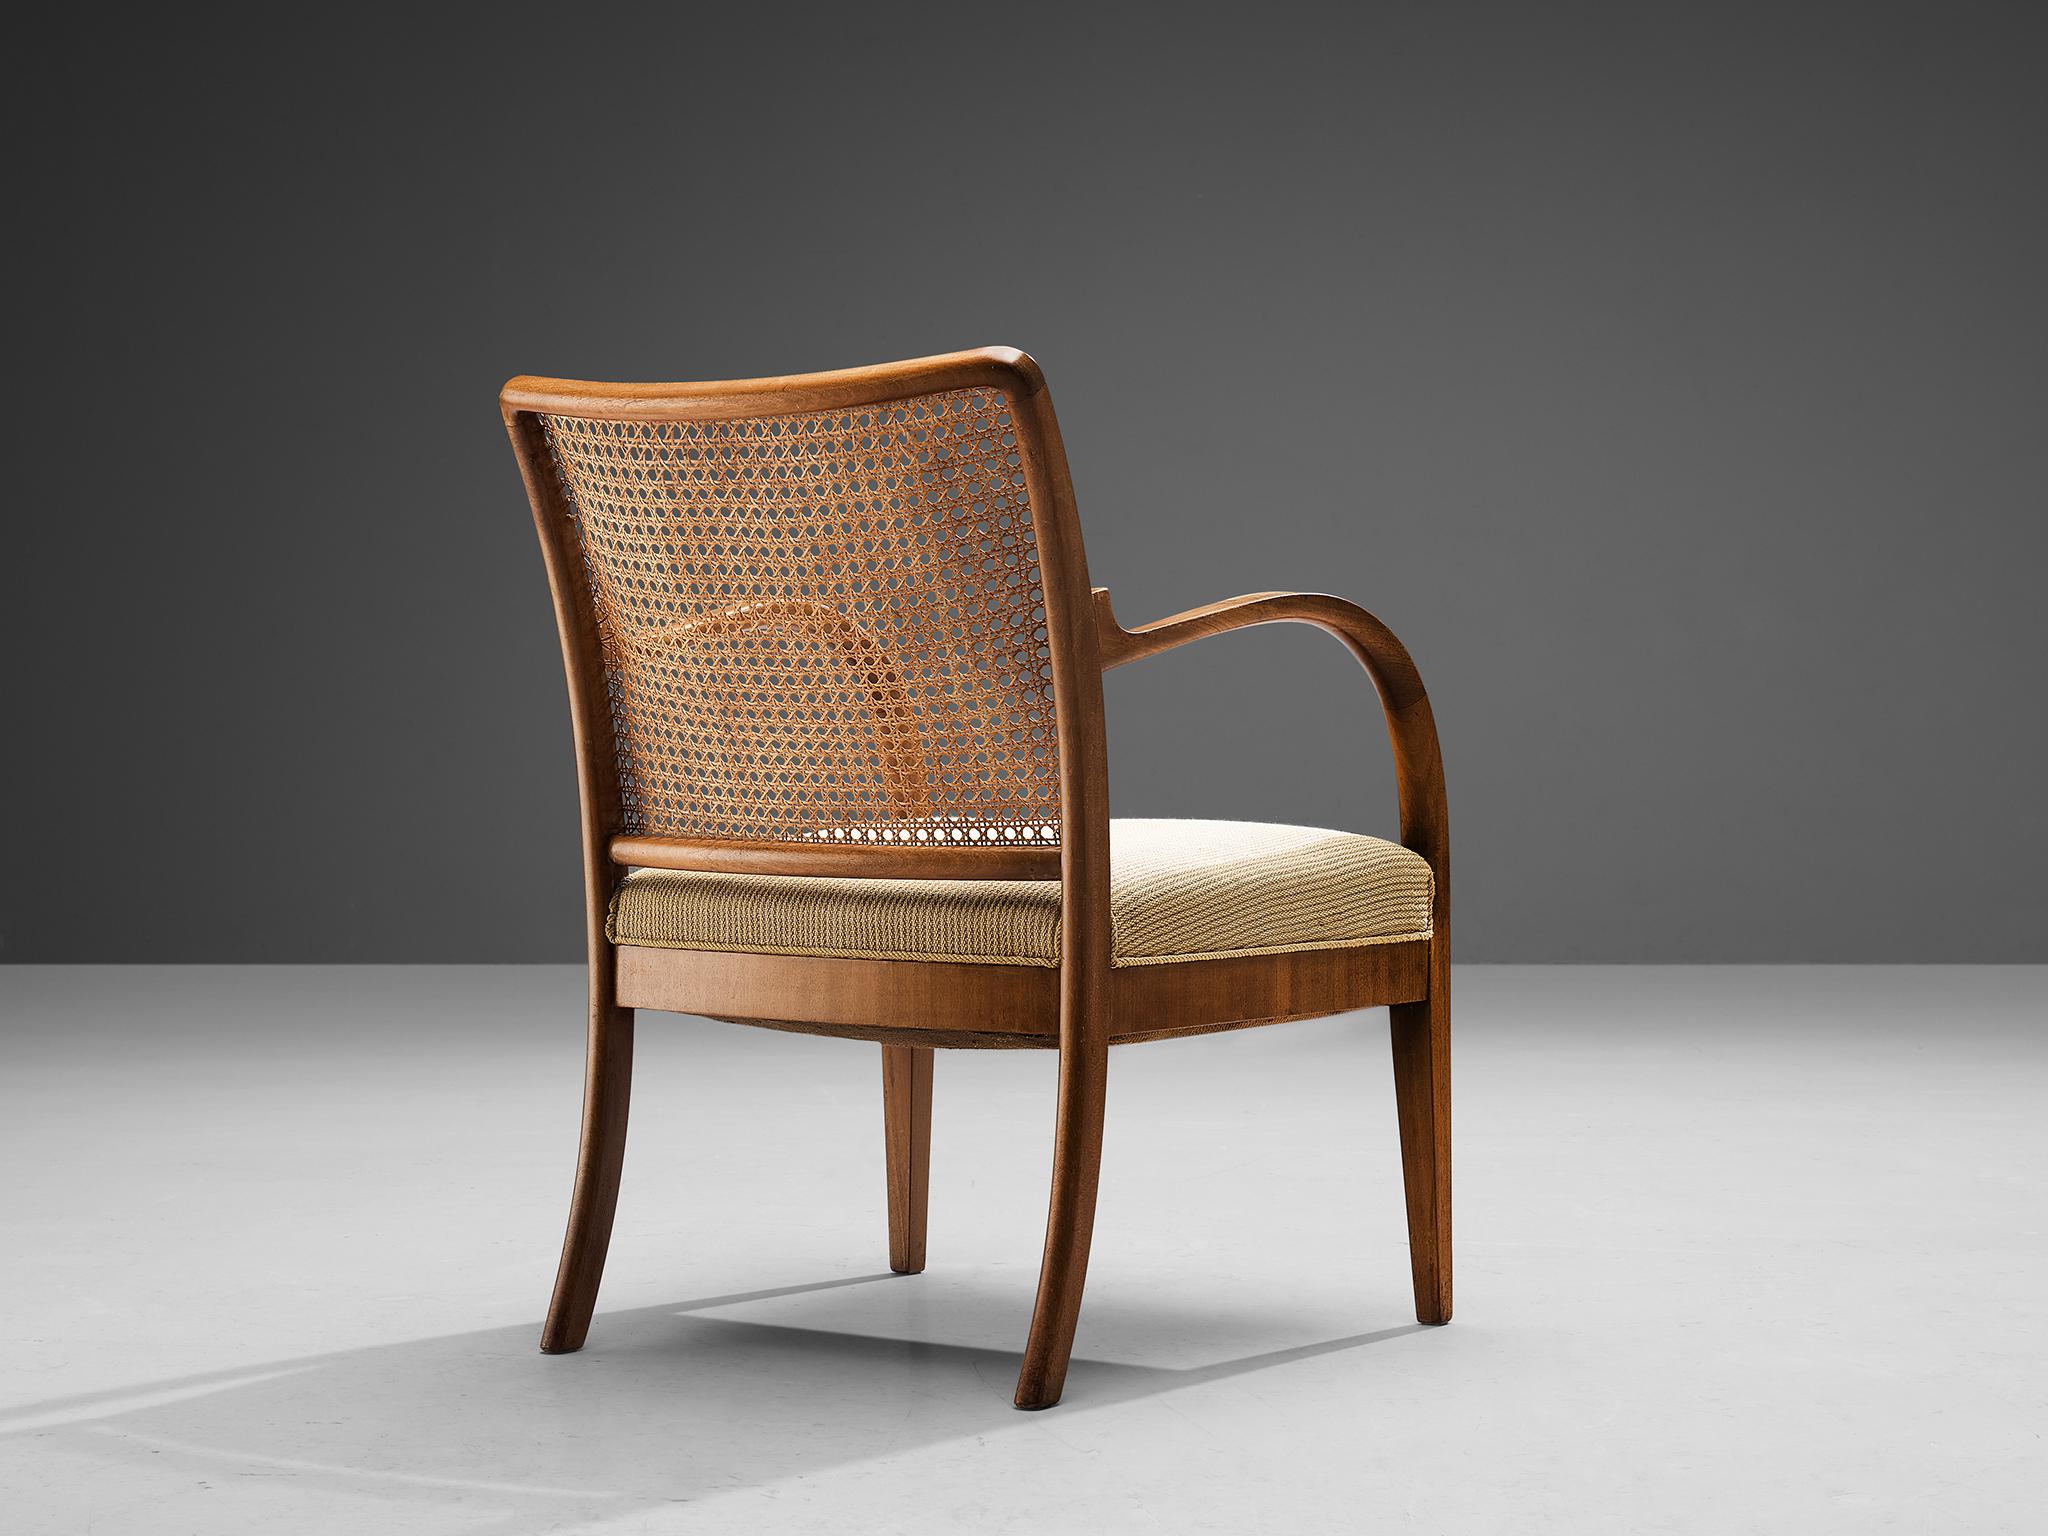 European Armchair in Mahogany and Cane